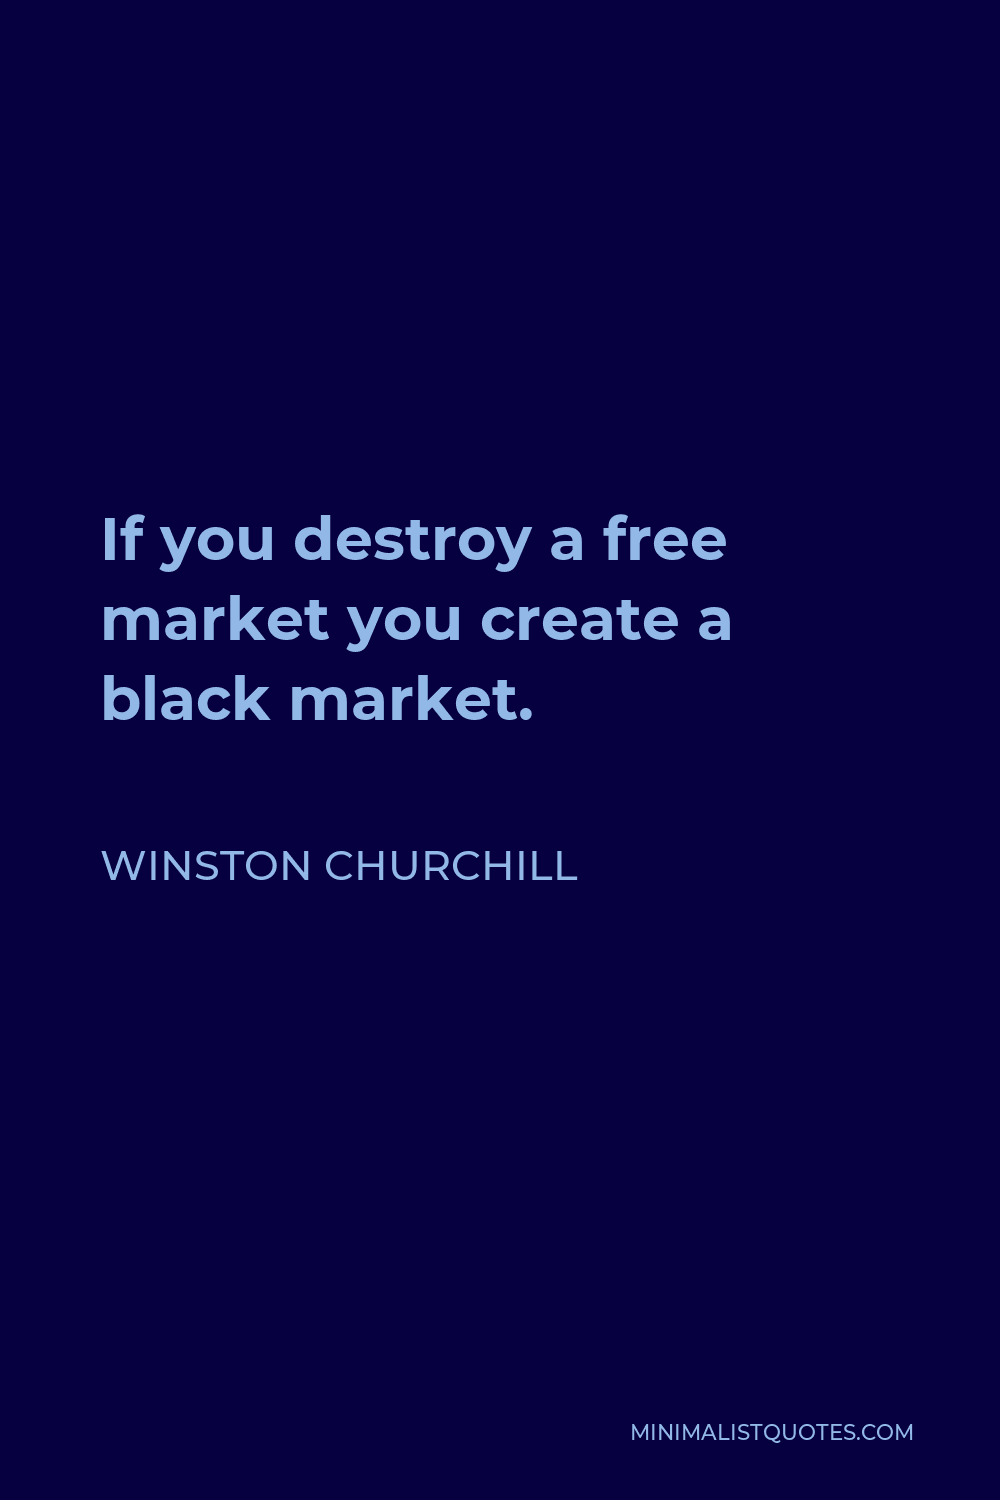 Winston Churchill Quote - If you destroy a free market you create a black market.